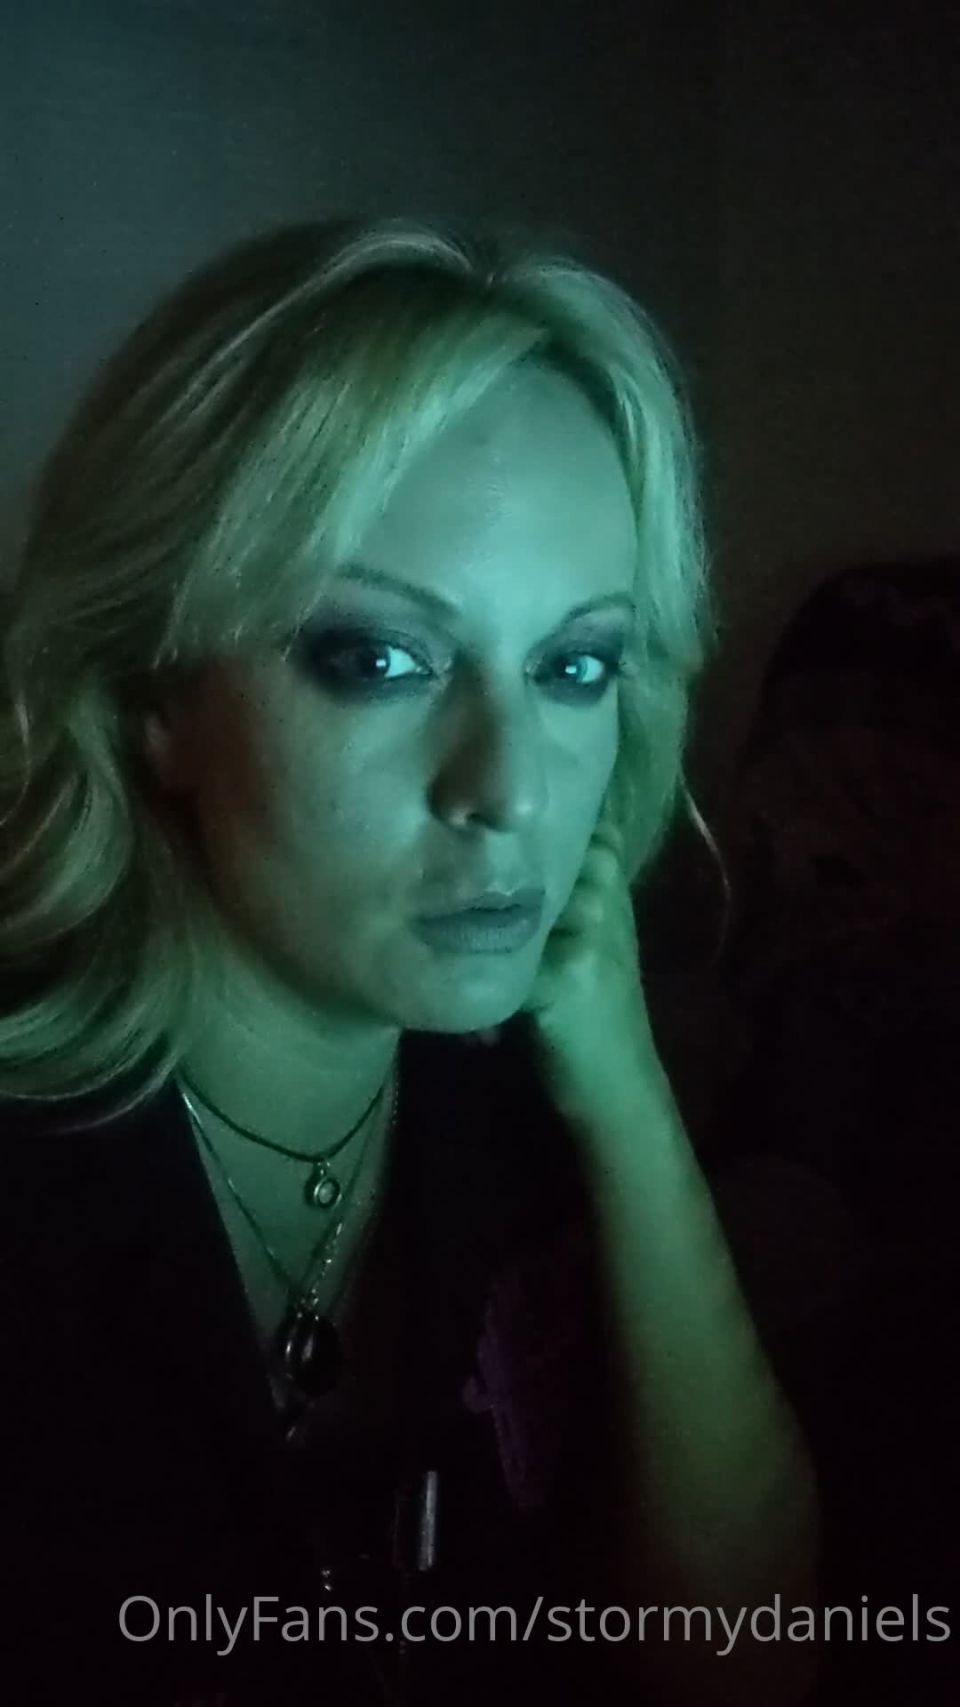 Stormy Daniels () Stormydaniels - some shots from ghost hunting last weekend 06-08-2020